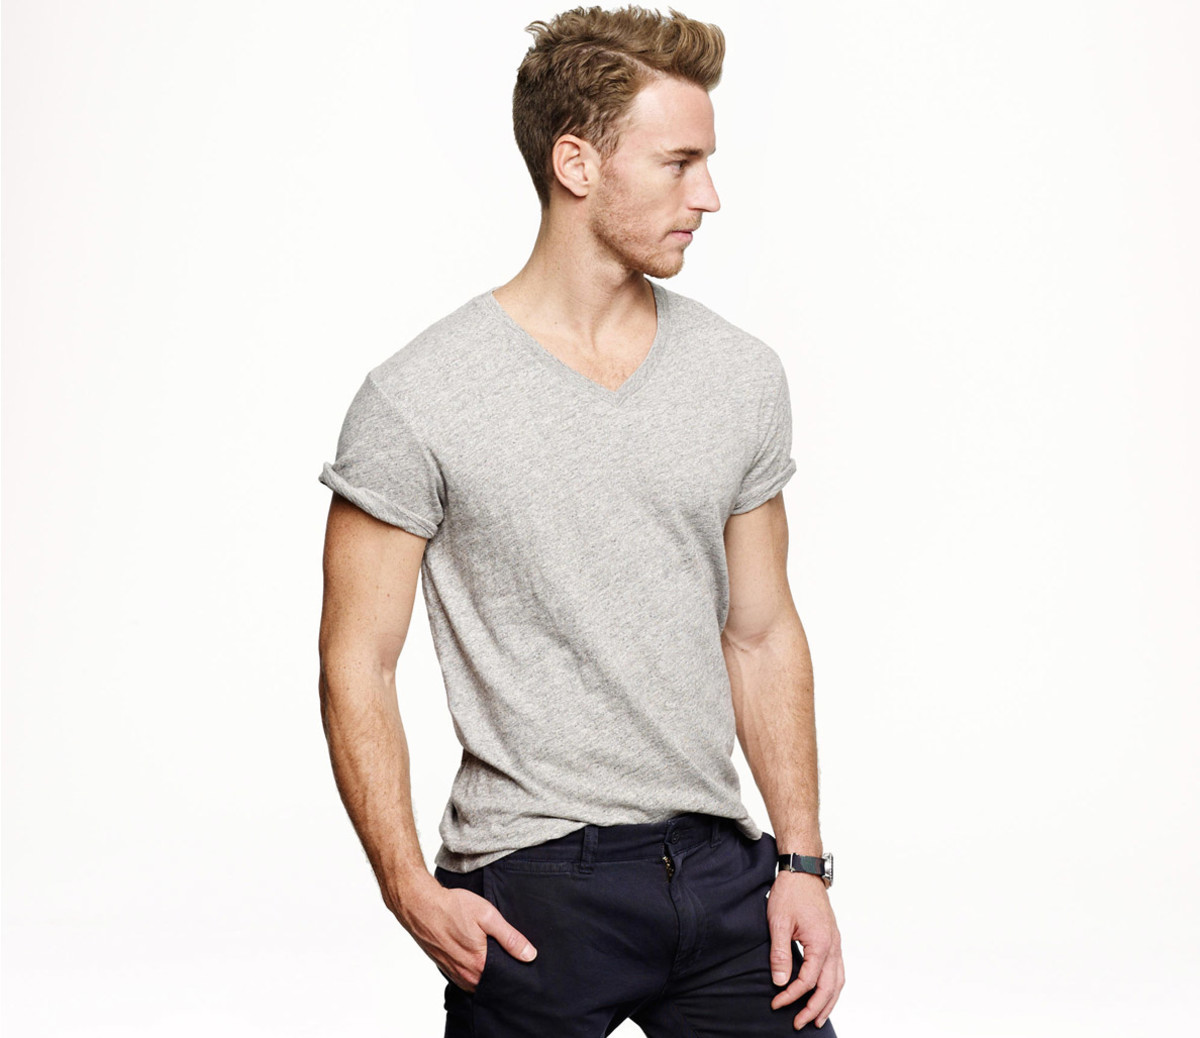 Brown Cargo Pants with White Crew-neck T-shirt Warm Weather